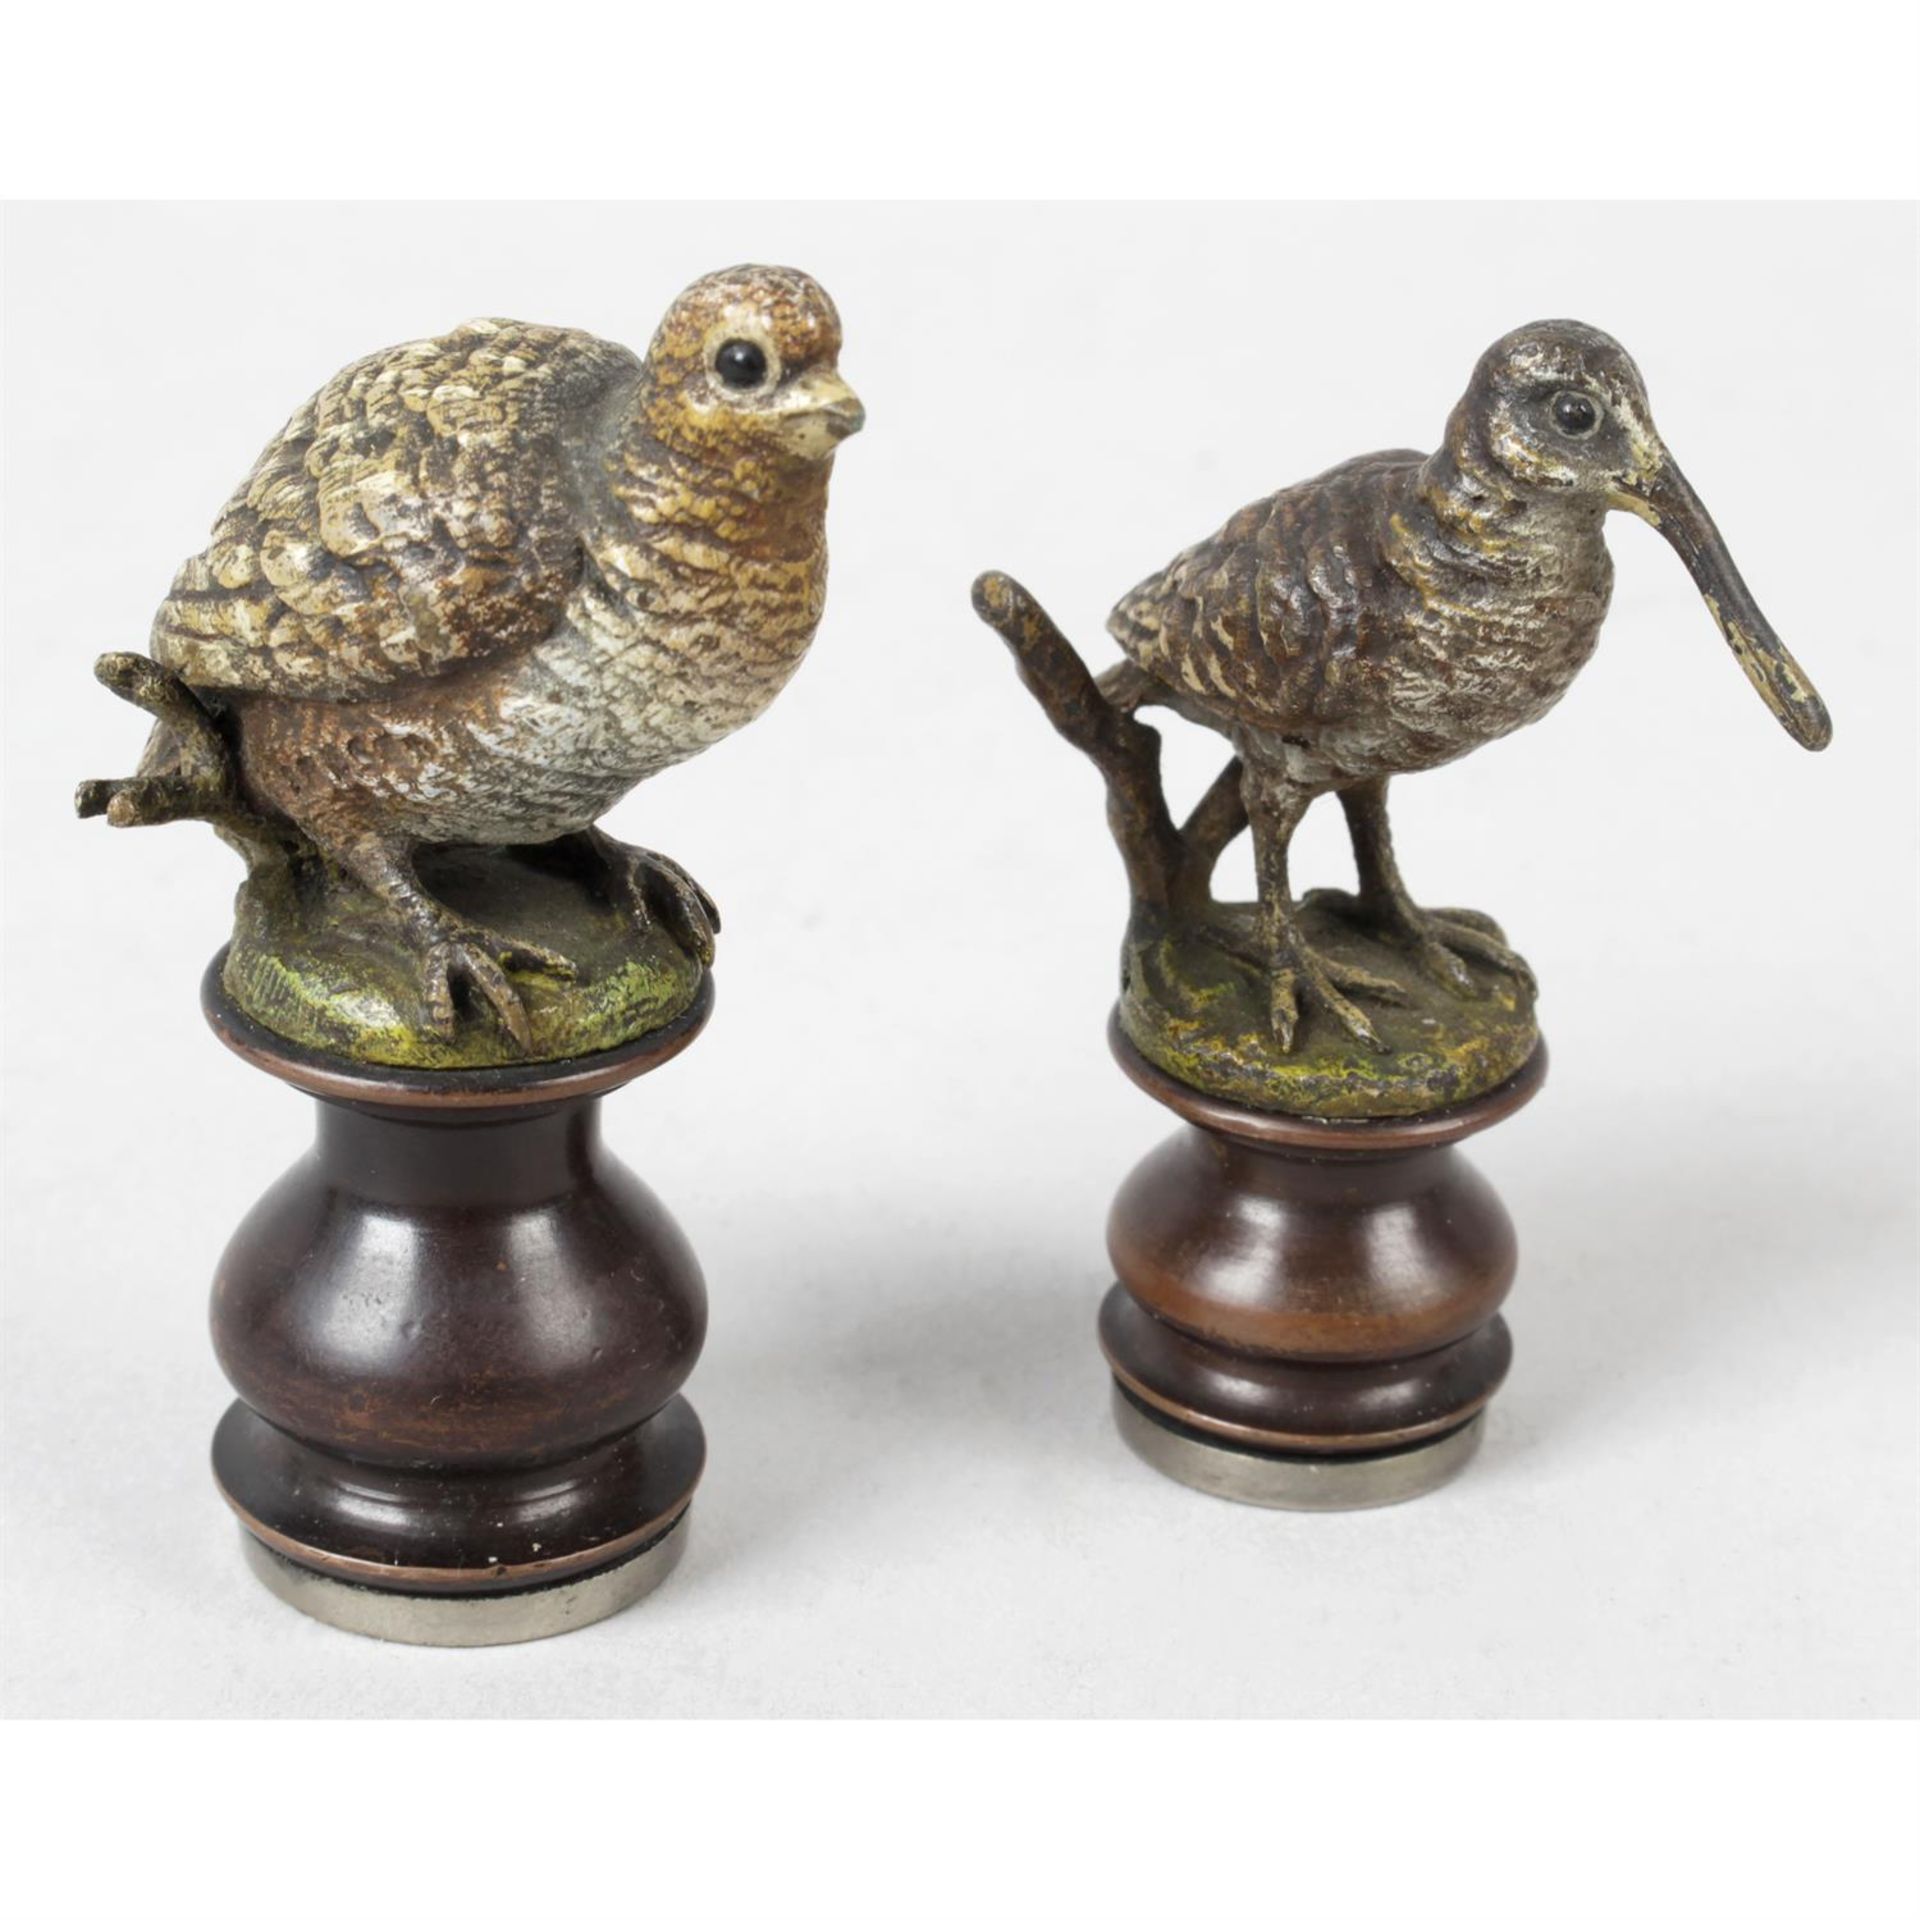 A small bronze cold painted desk seal modelled as a game bird, together with another similar